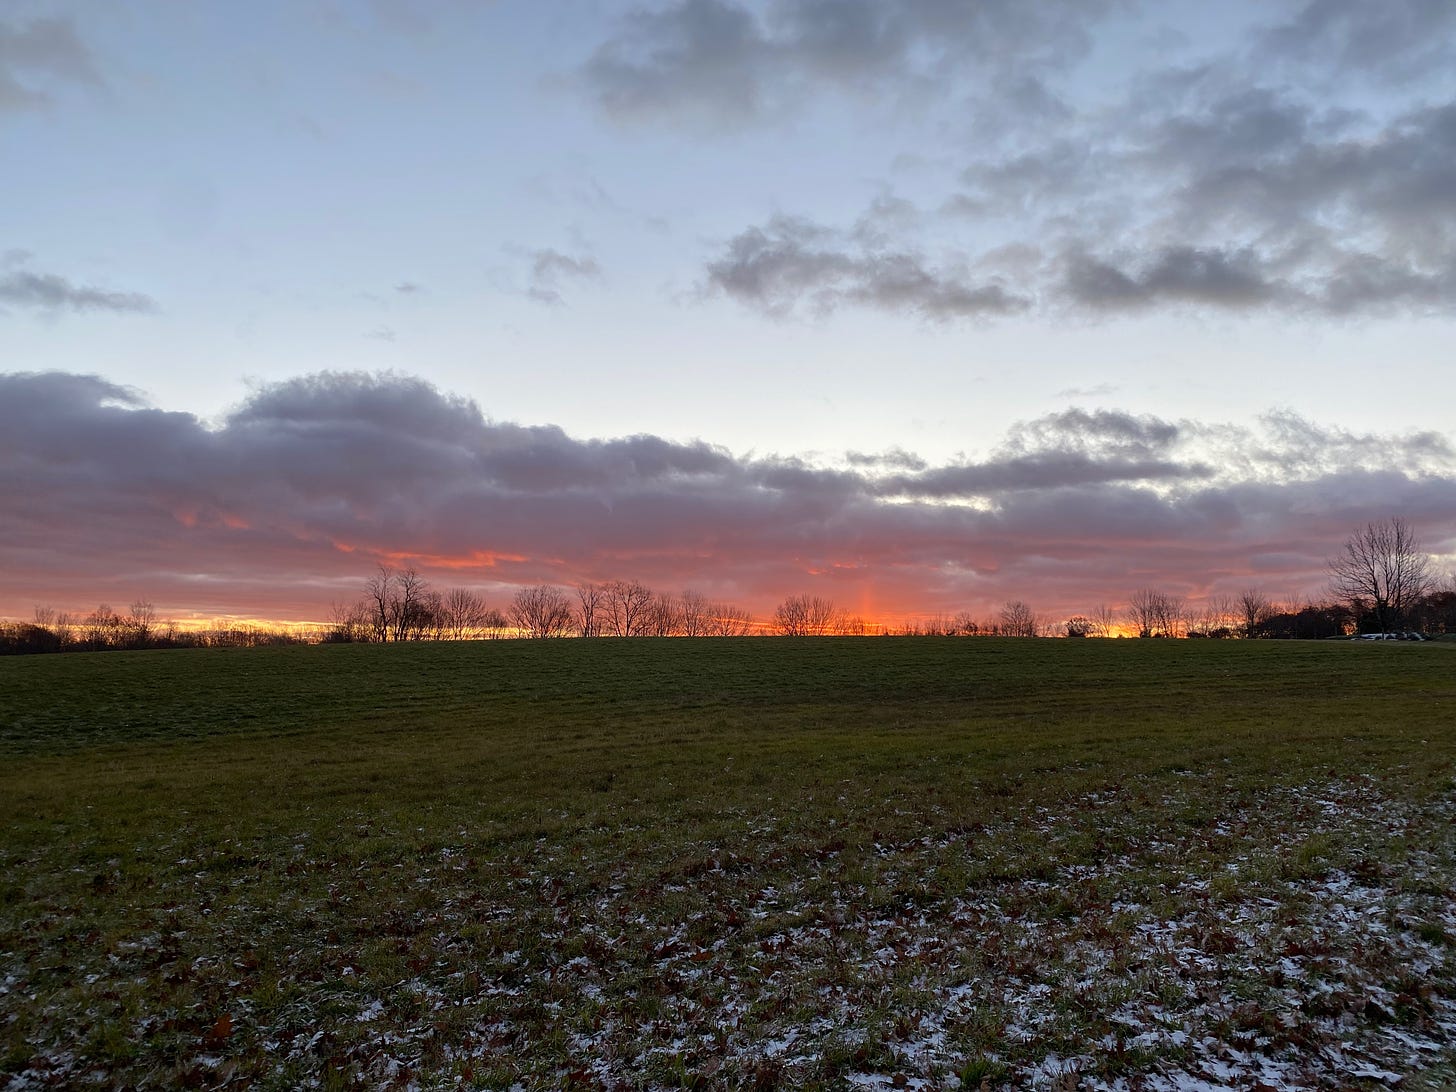 Sunrise over a green field, lightly dusted with snow. The sky is cloudy, the sun not yet risen, the horizon blazing pink, orange, and golden.